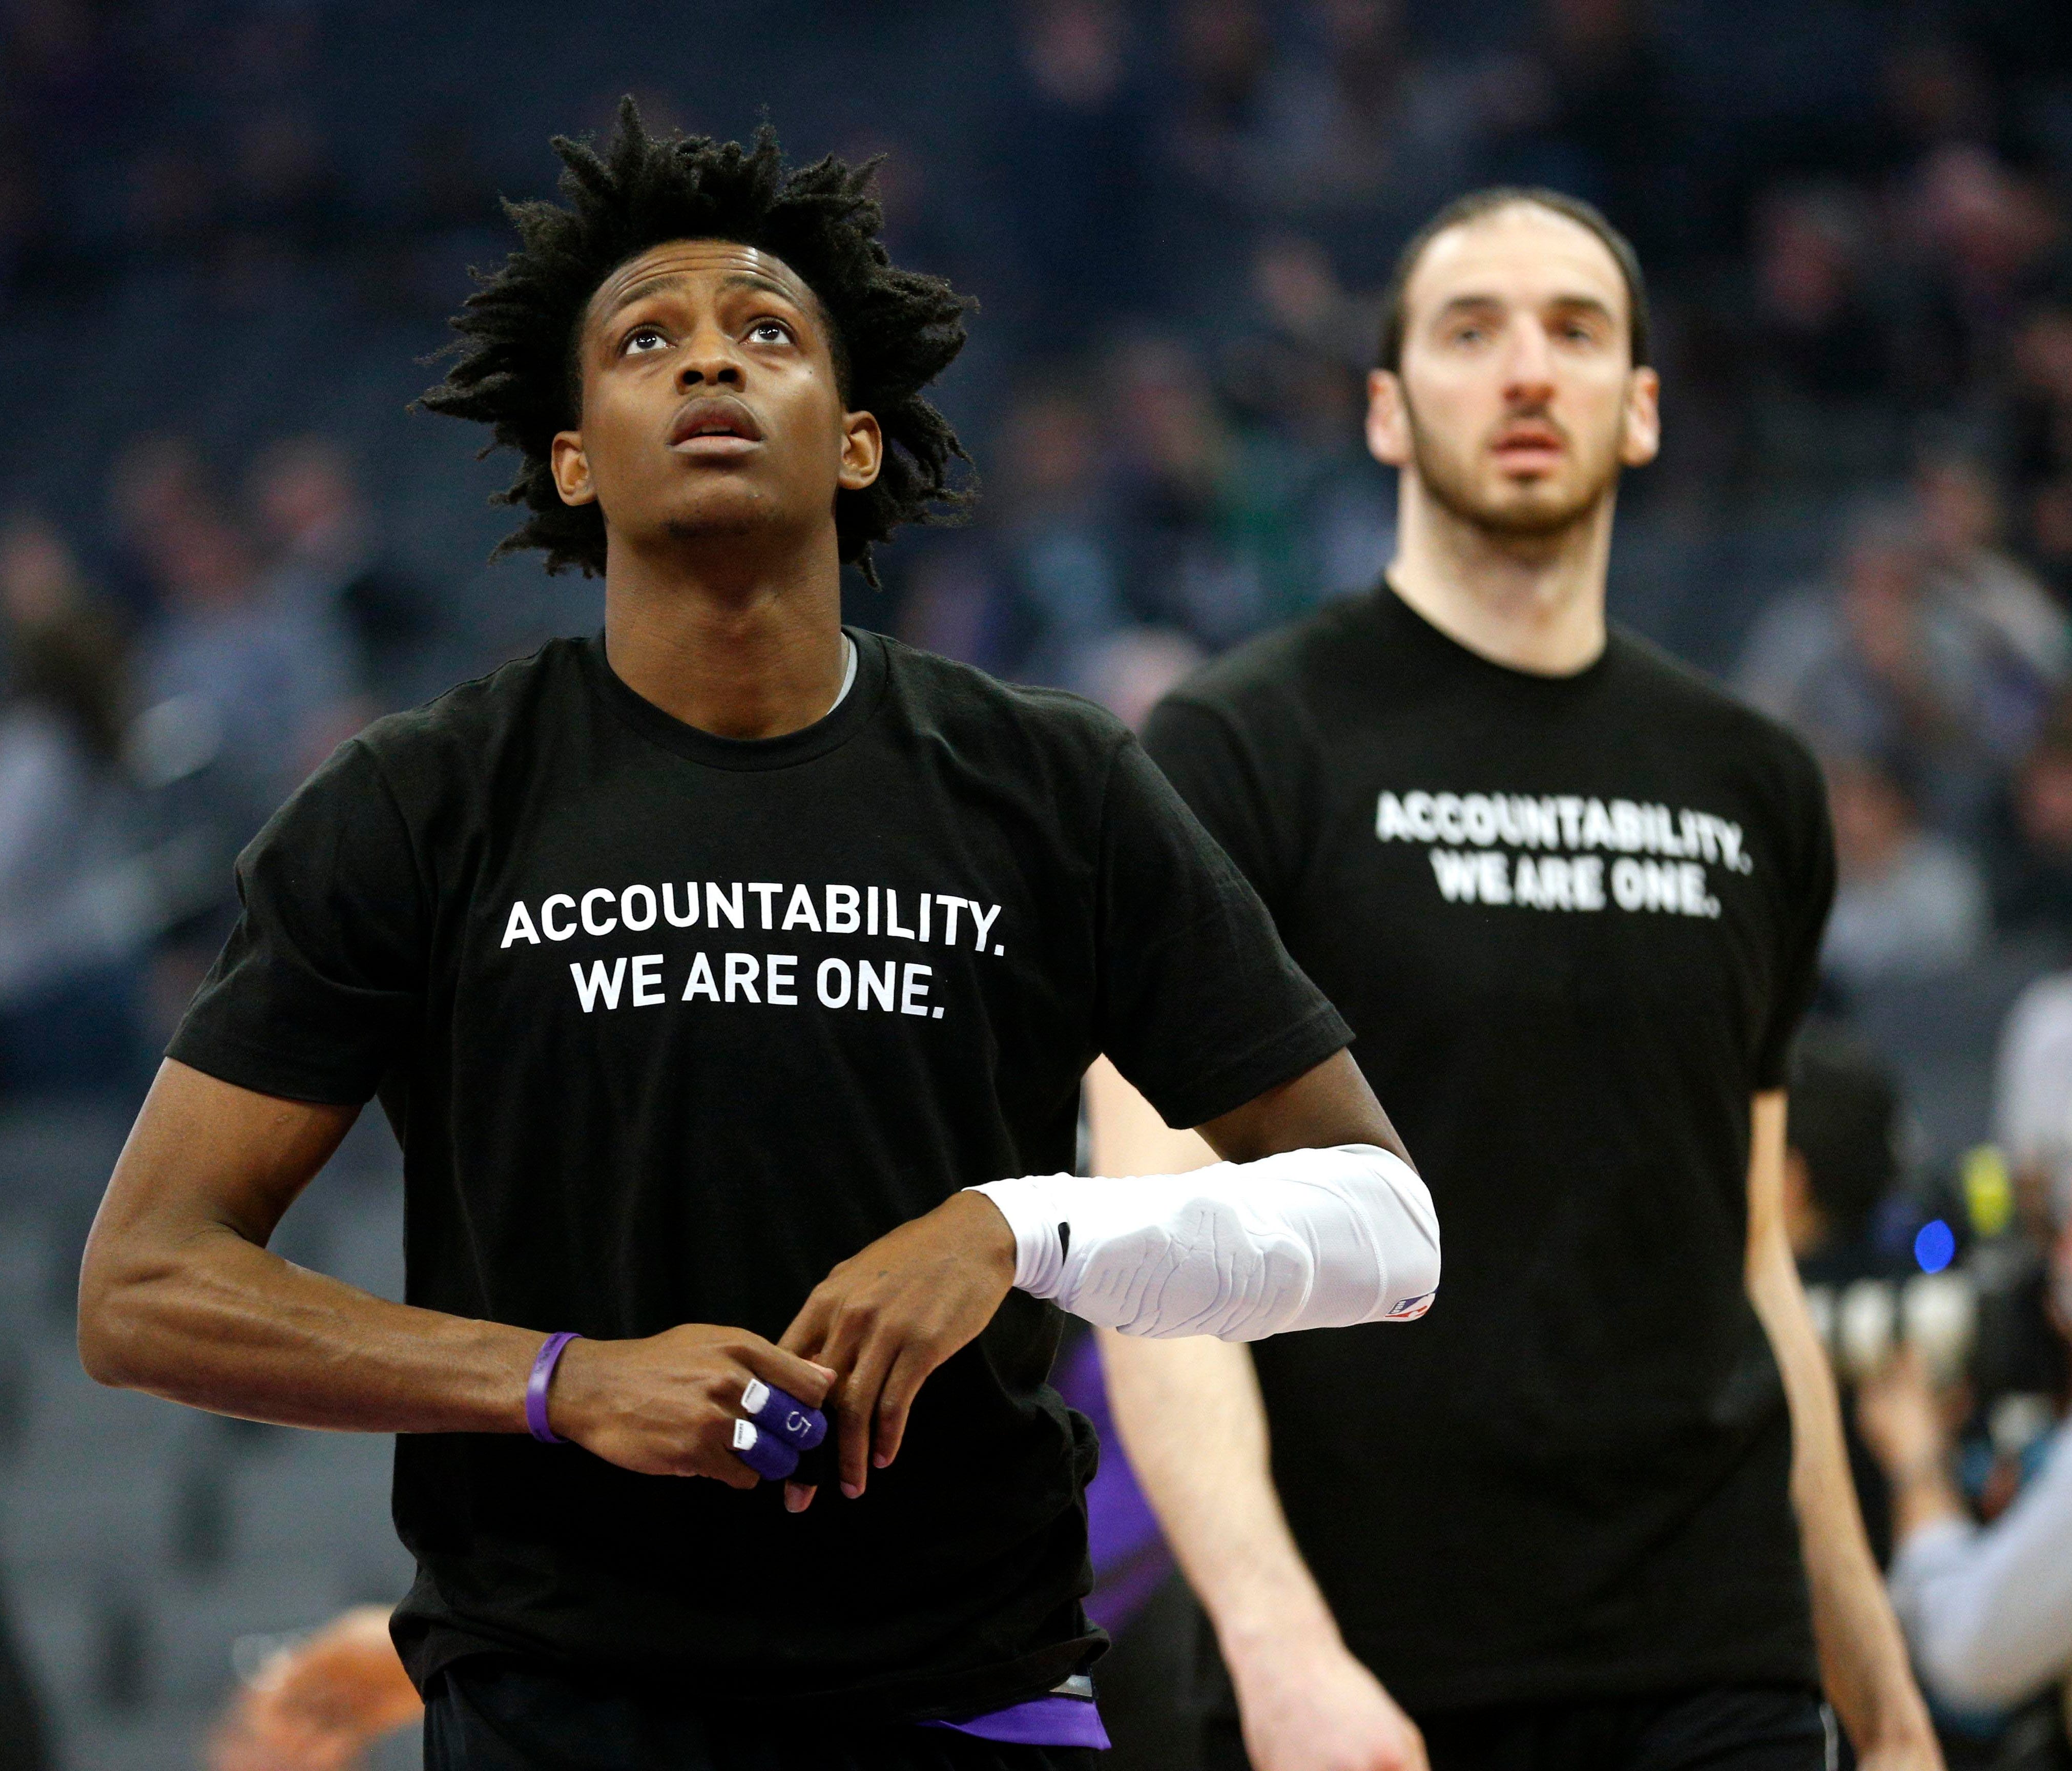 Sacramento Kings guard De'Aaron Fox stands on the court before the start of the game against the Boston Celtics.